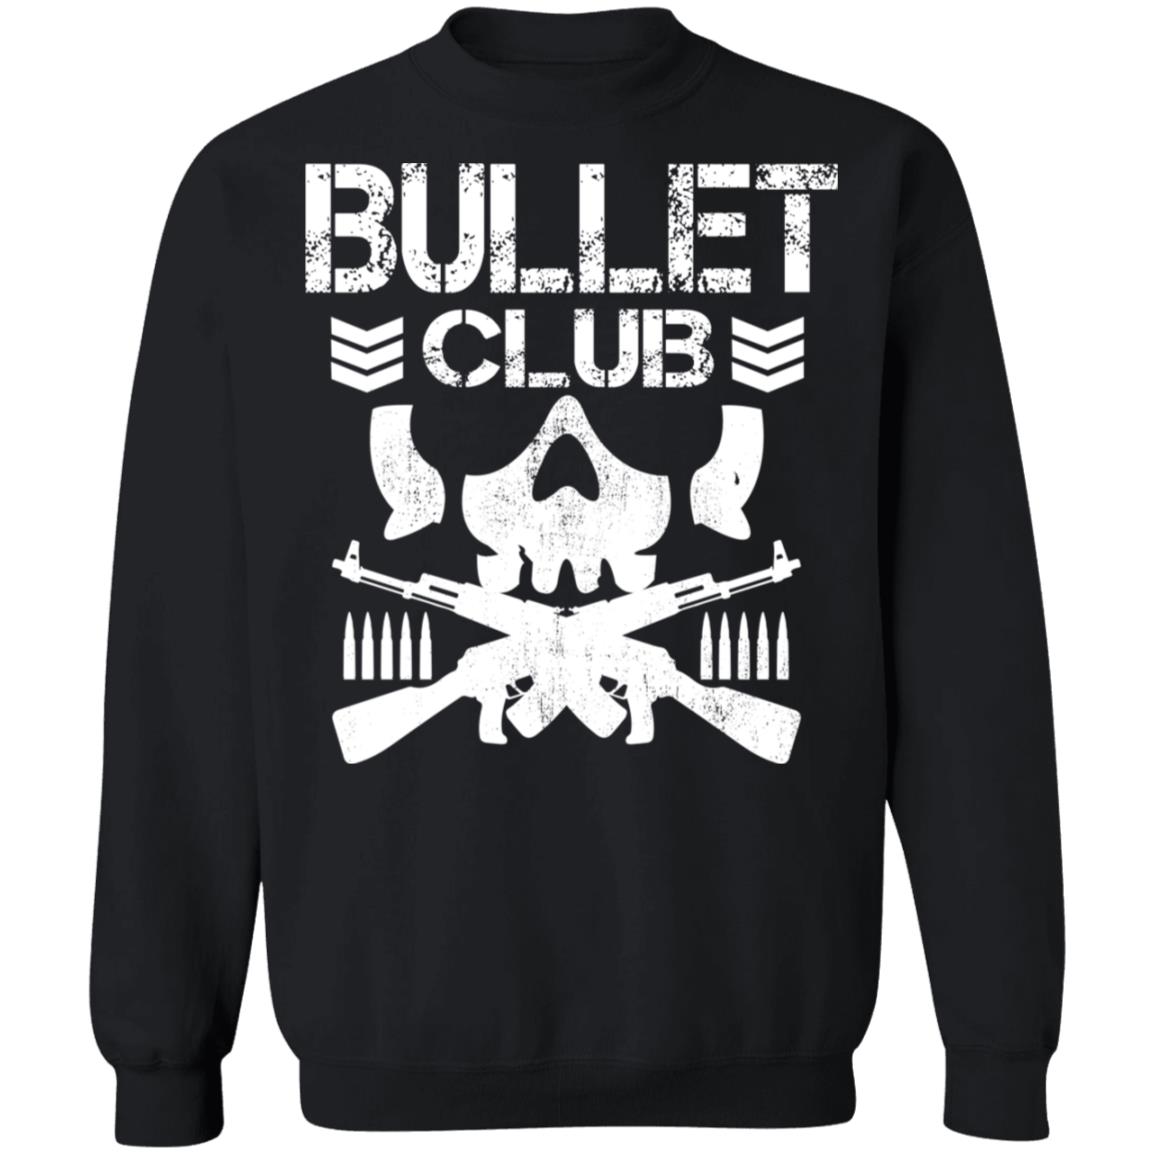 Bullet Club Shirt - TeeMoonley – Cool T-Shirts Online Store For Every ...